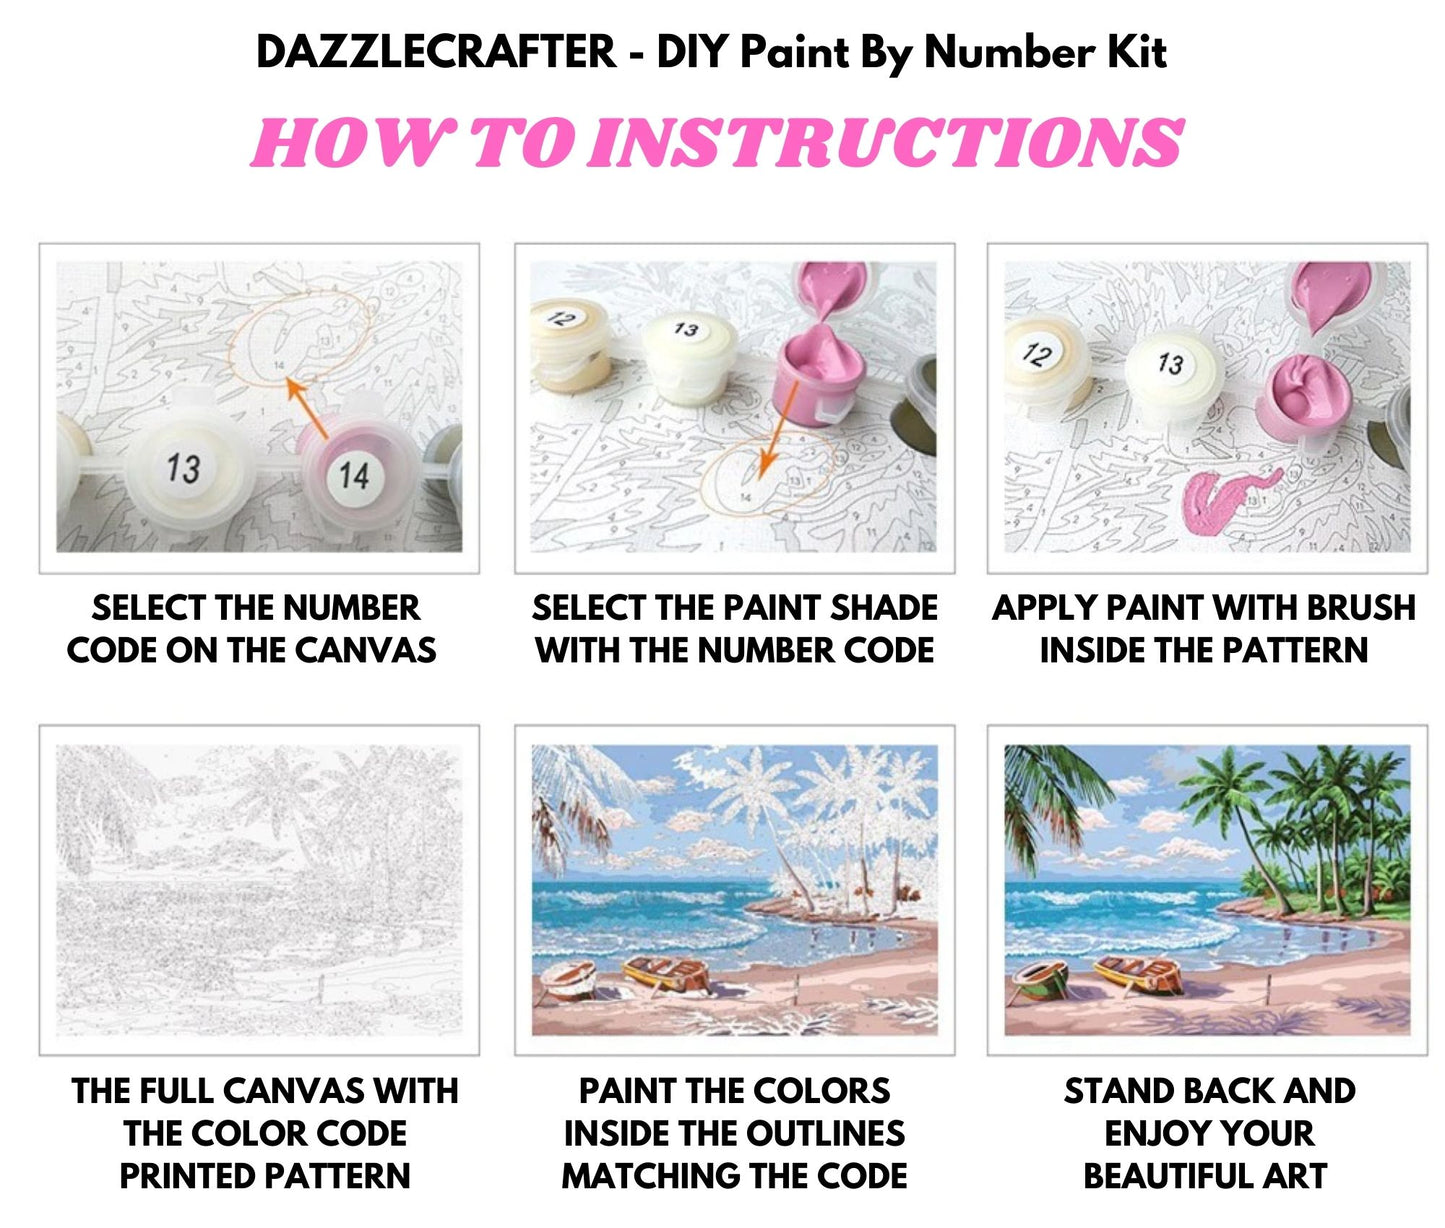 CUTE LITTLE RACCOON - DIY Adult Paint By Number Kit